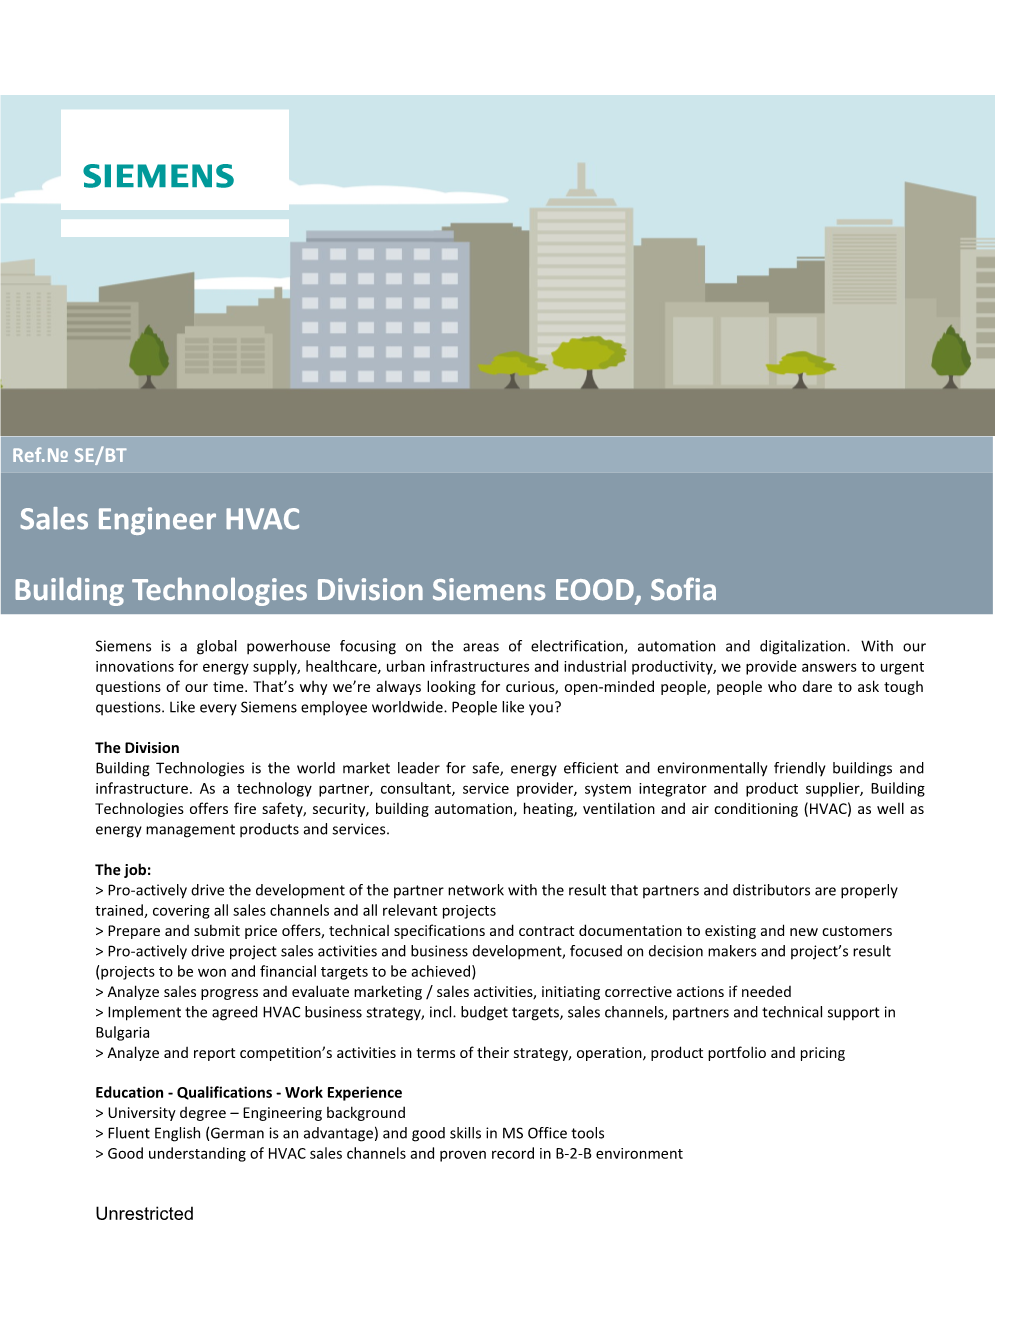 Siemens Is a Global Powerhouse Focusing on the Areas of Electrification, Automation And